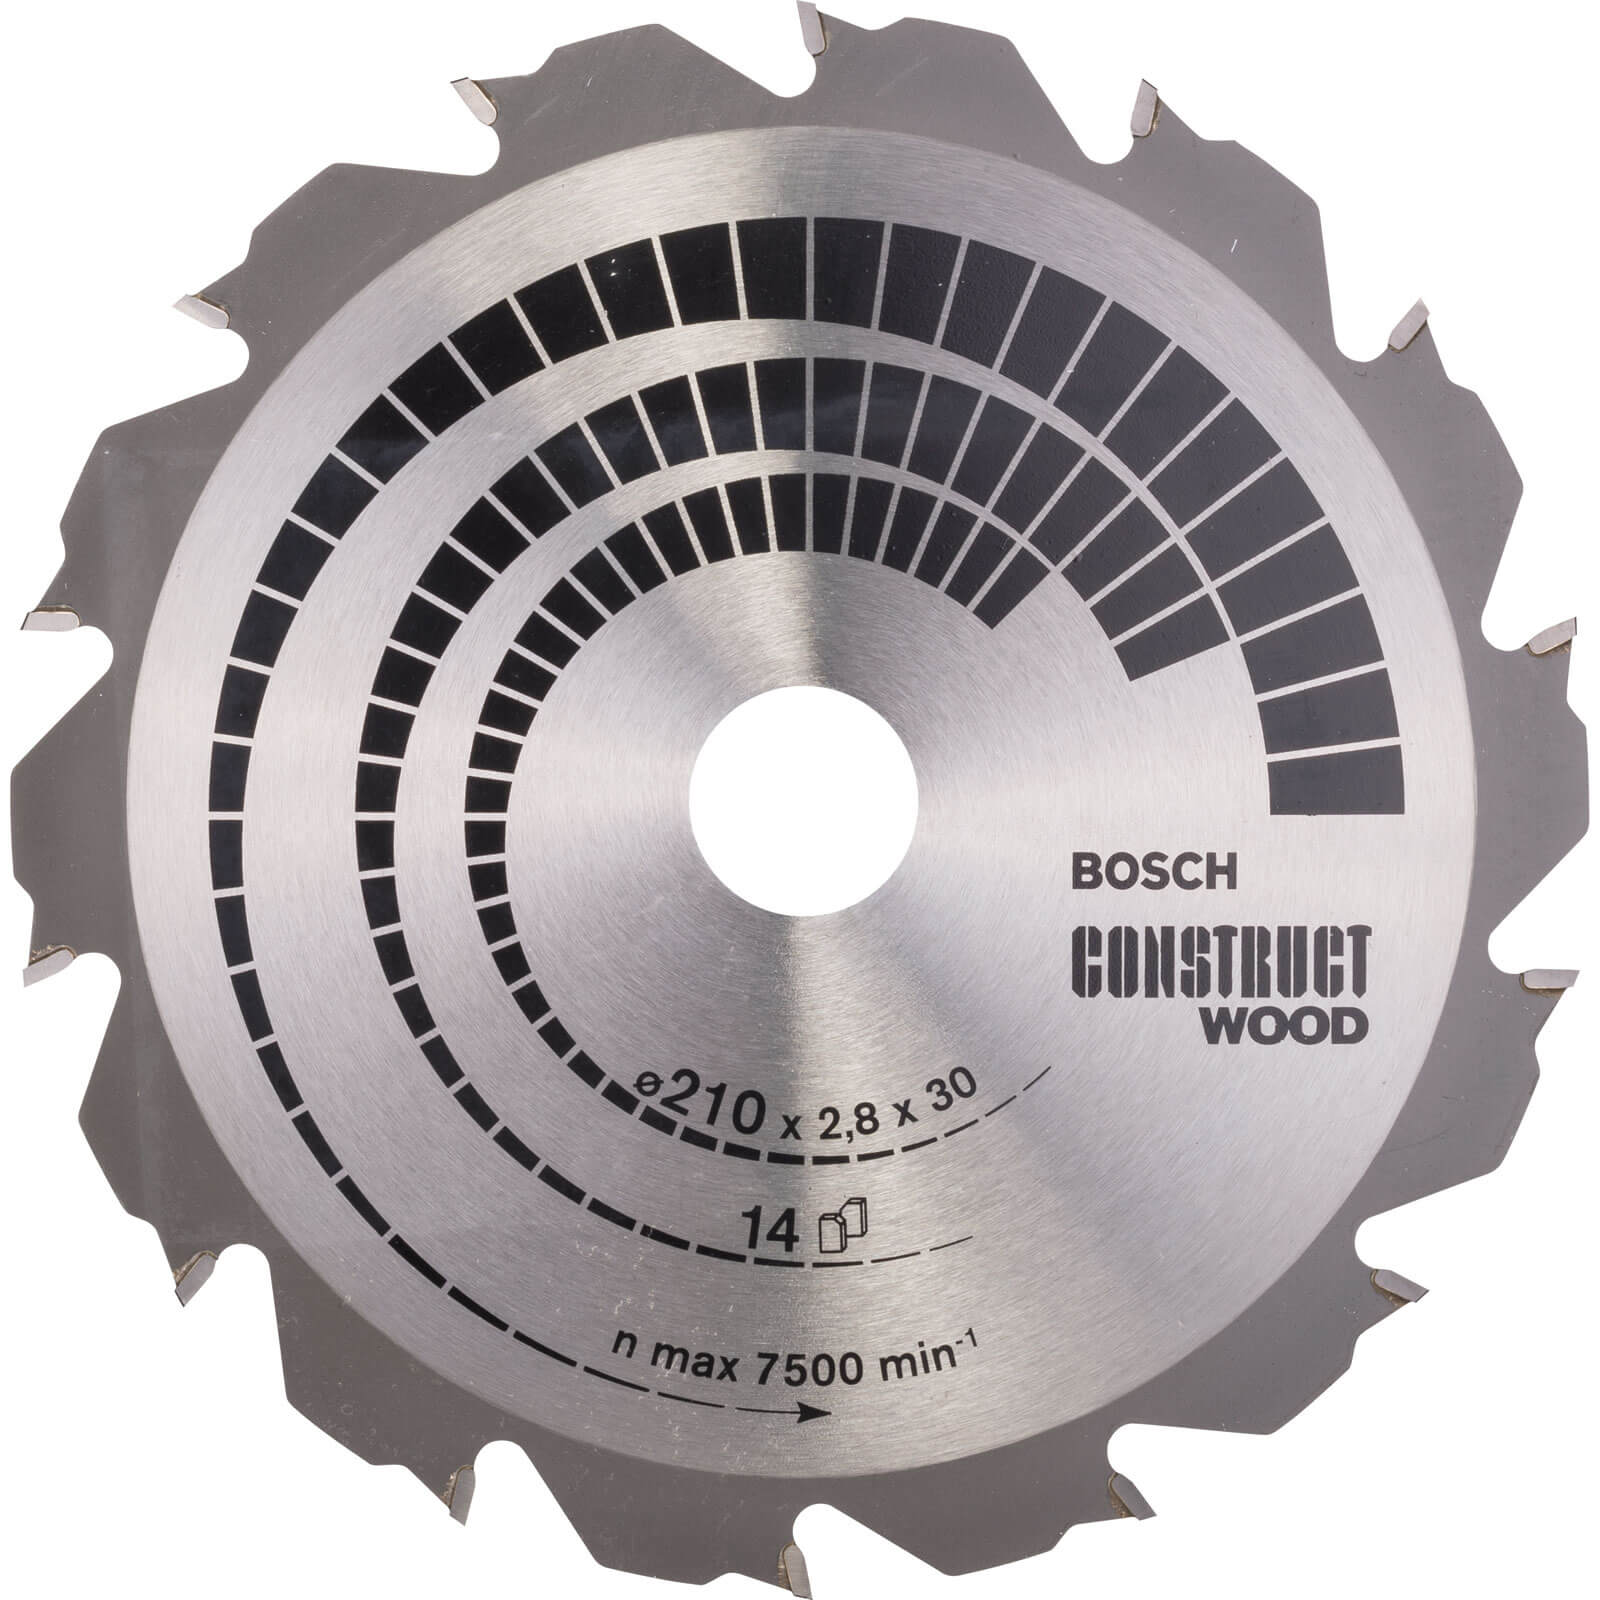 Photo of Bosch Construct Wood Cutting Saw Blade 210mm 14t 30mm